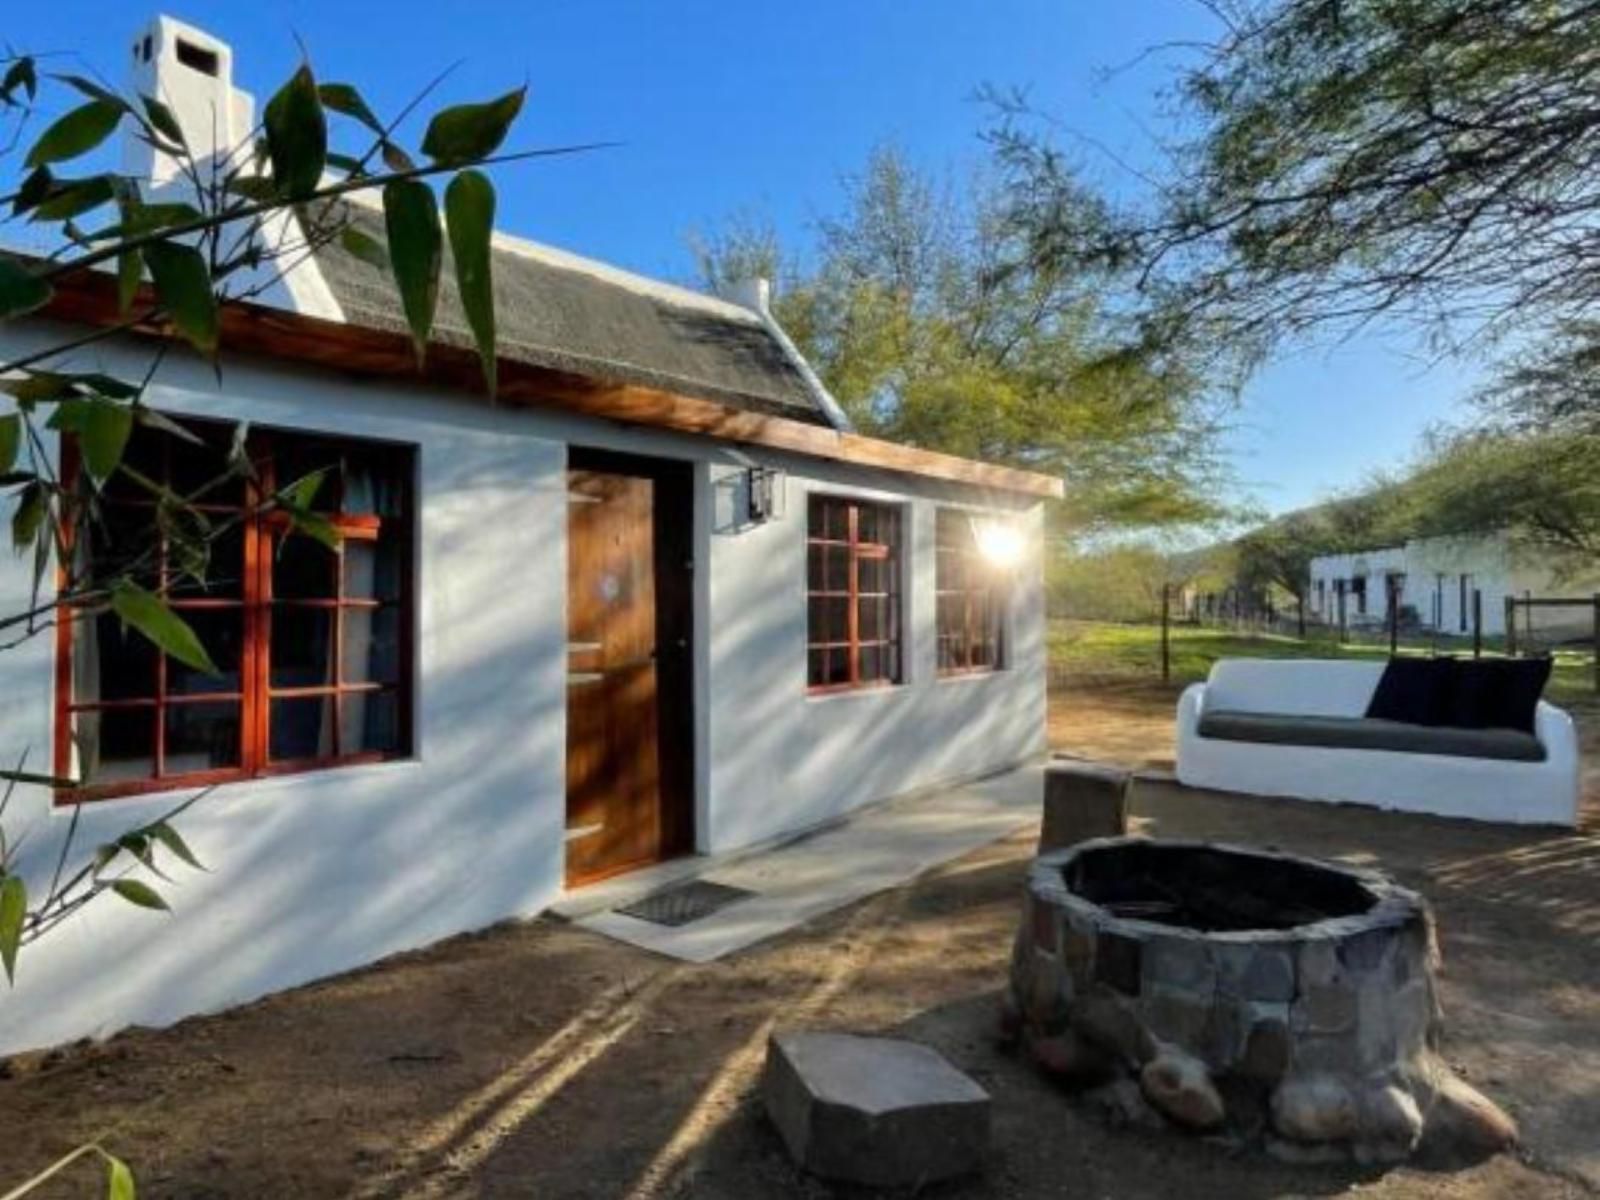 Enjo Nature Farm Clanwilliam Western Cape South Africa House, Building, Architecture